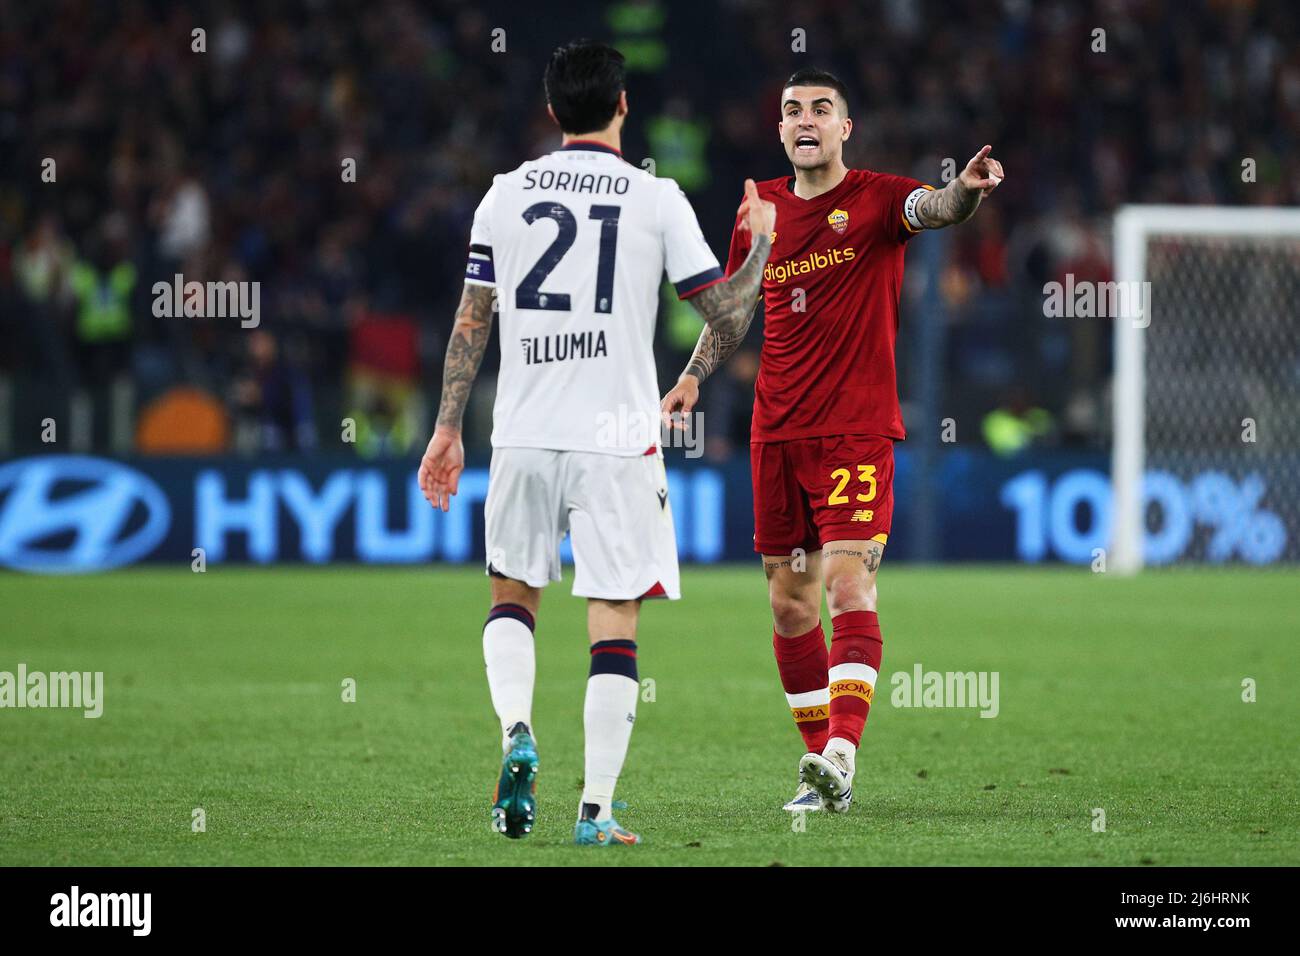 Gianluca Mancini Of Roma R Argues With Roberto Soriano Of Bologna L During The Italian Championship Serie A Football Match Between As Roma And Bologna Fc On May 1 22 At Stadio